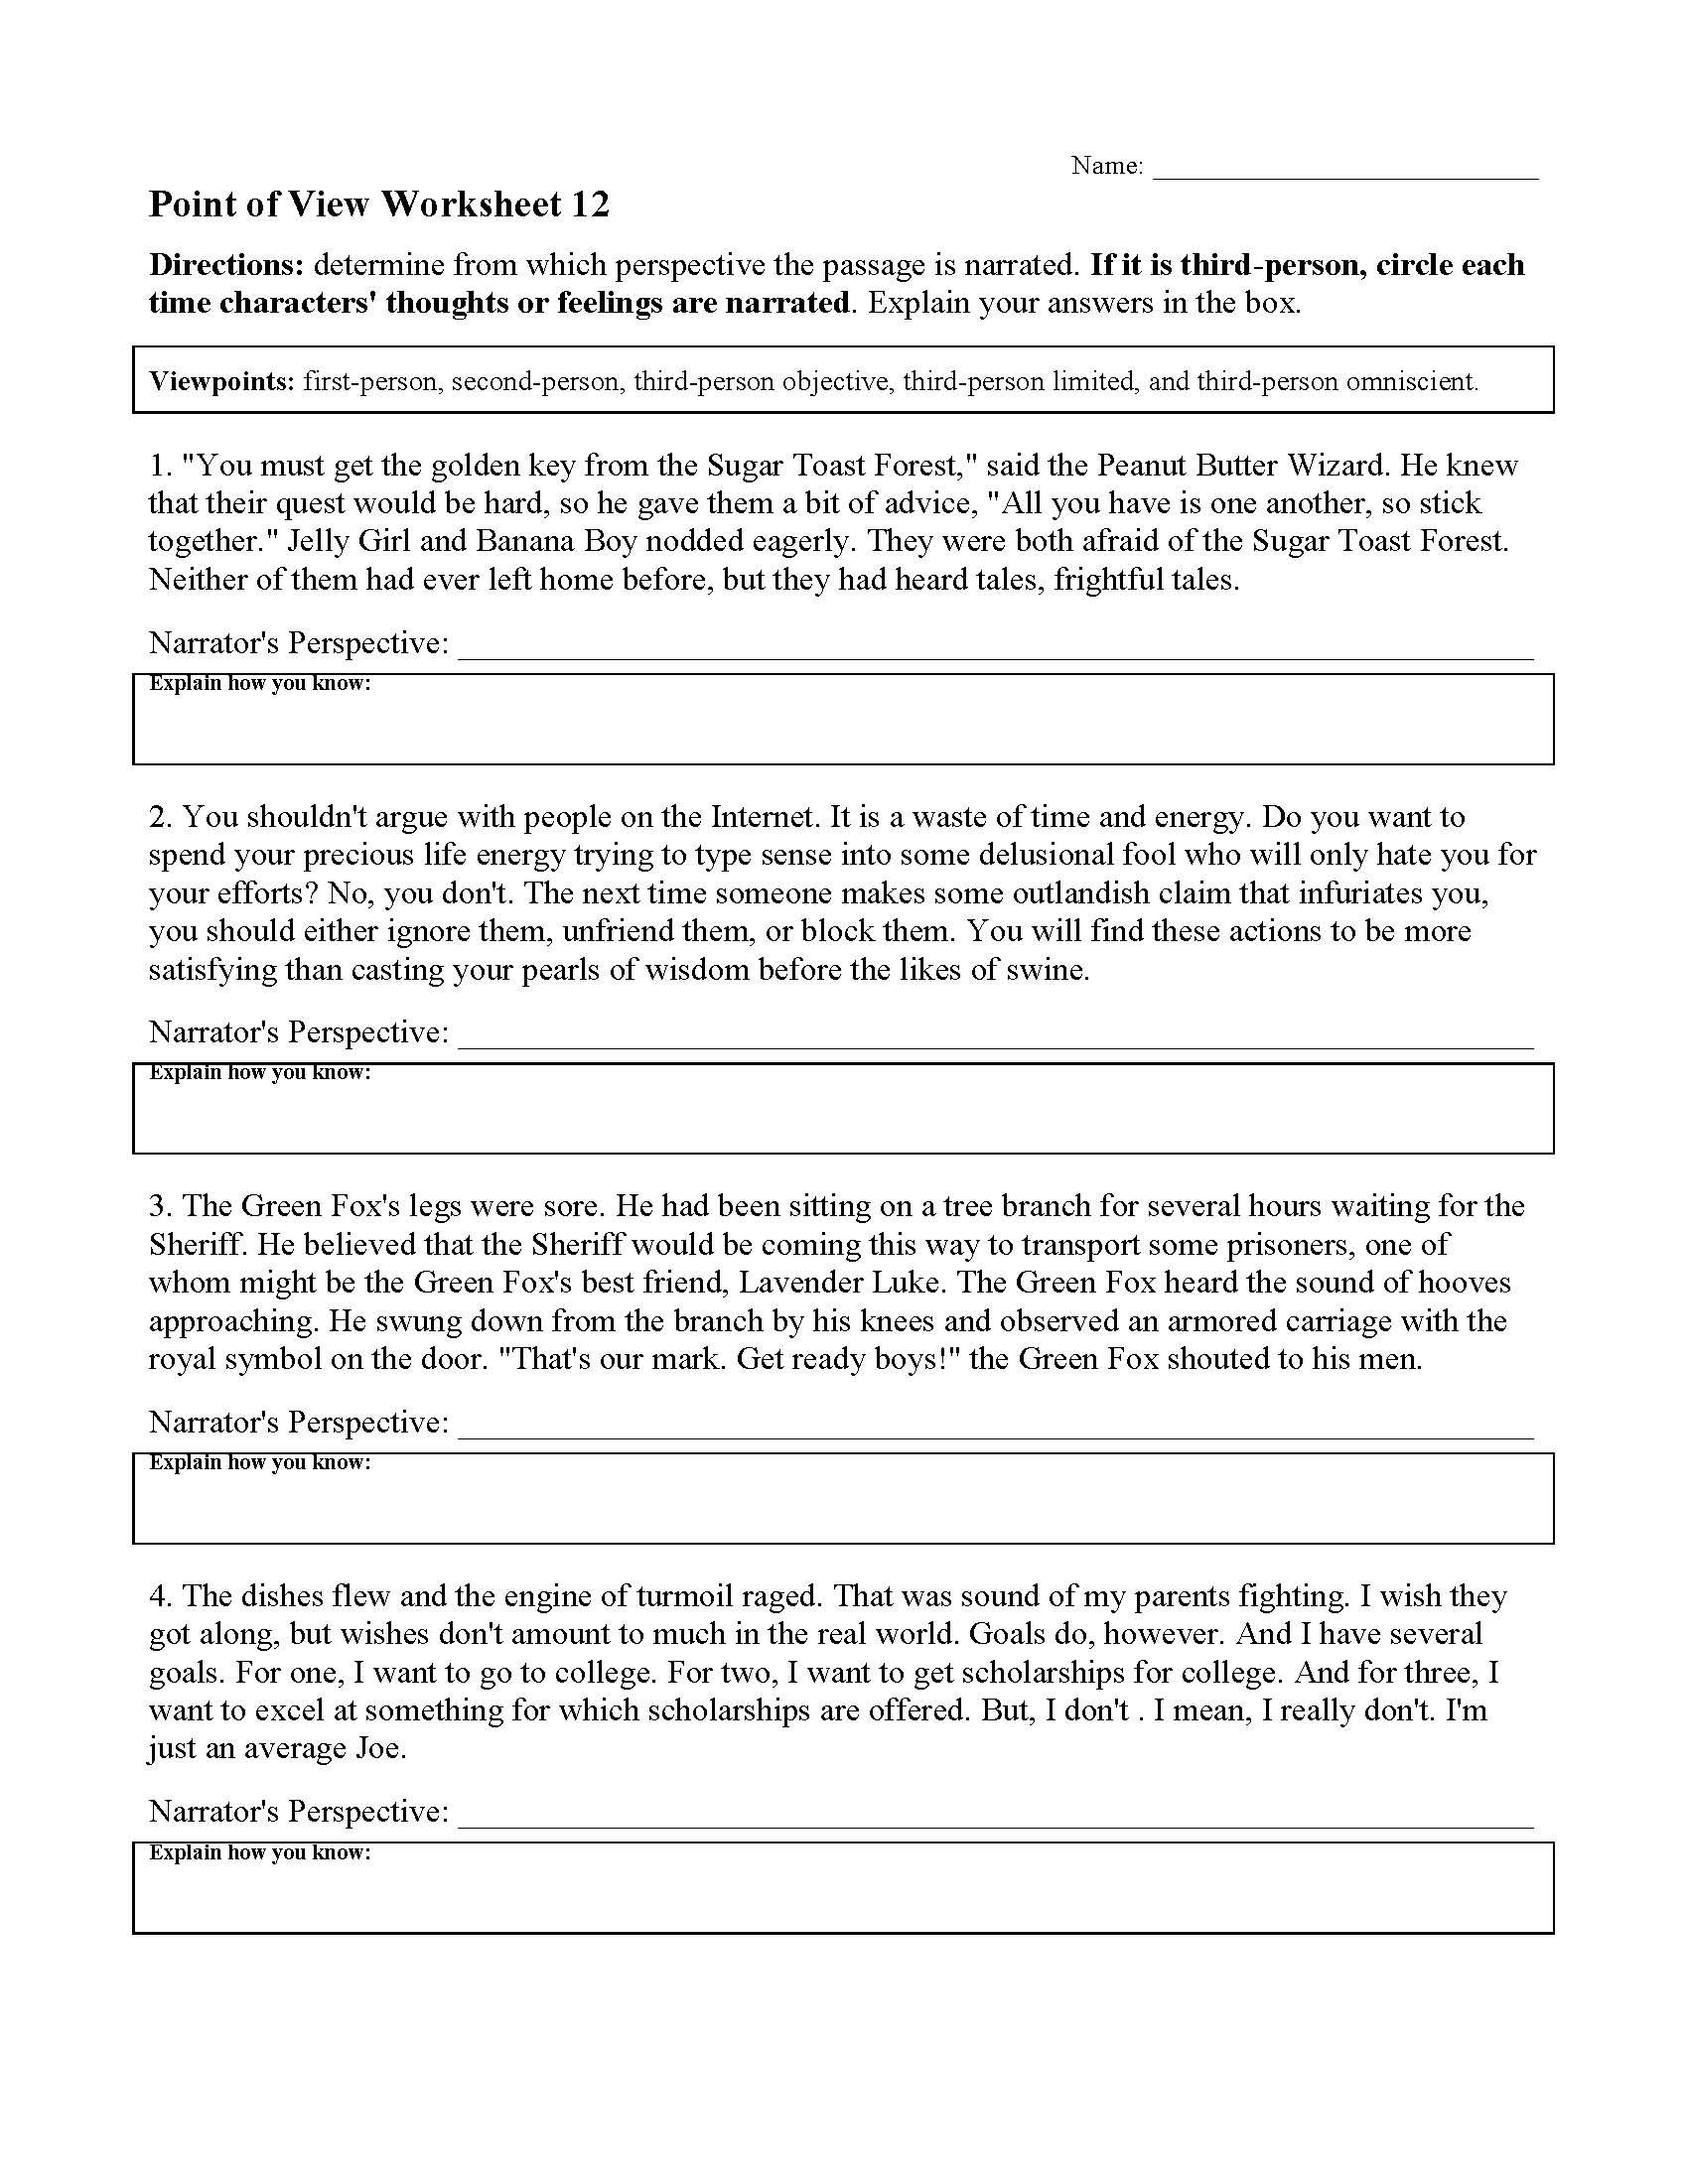 Point Of View Worksheet 12  Preview With Point Of View Worksheet 12